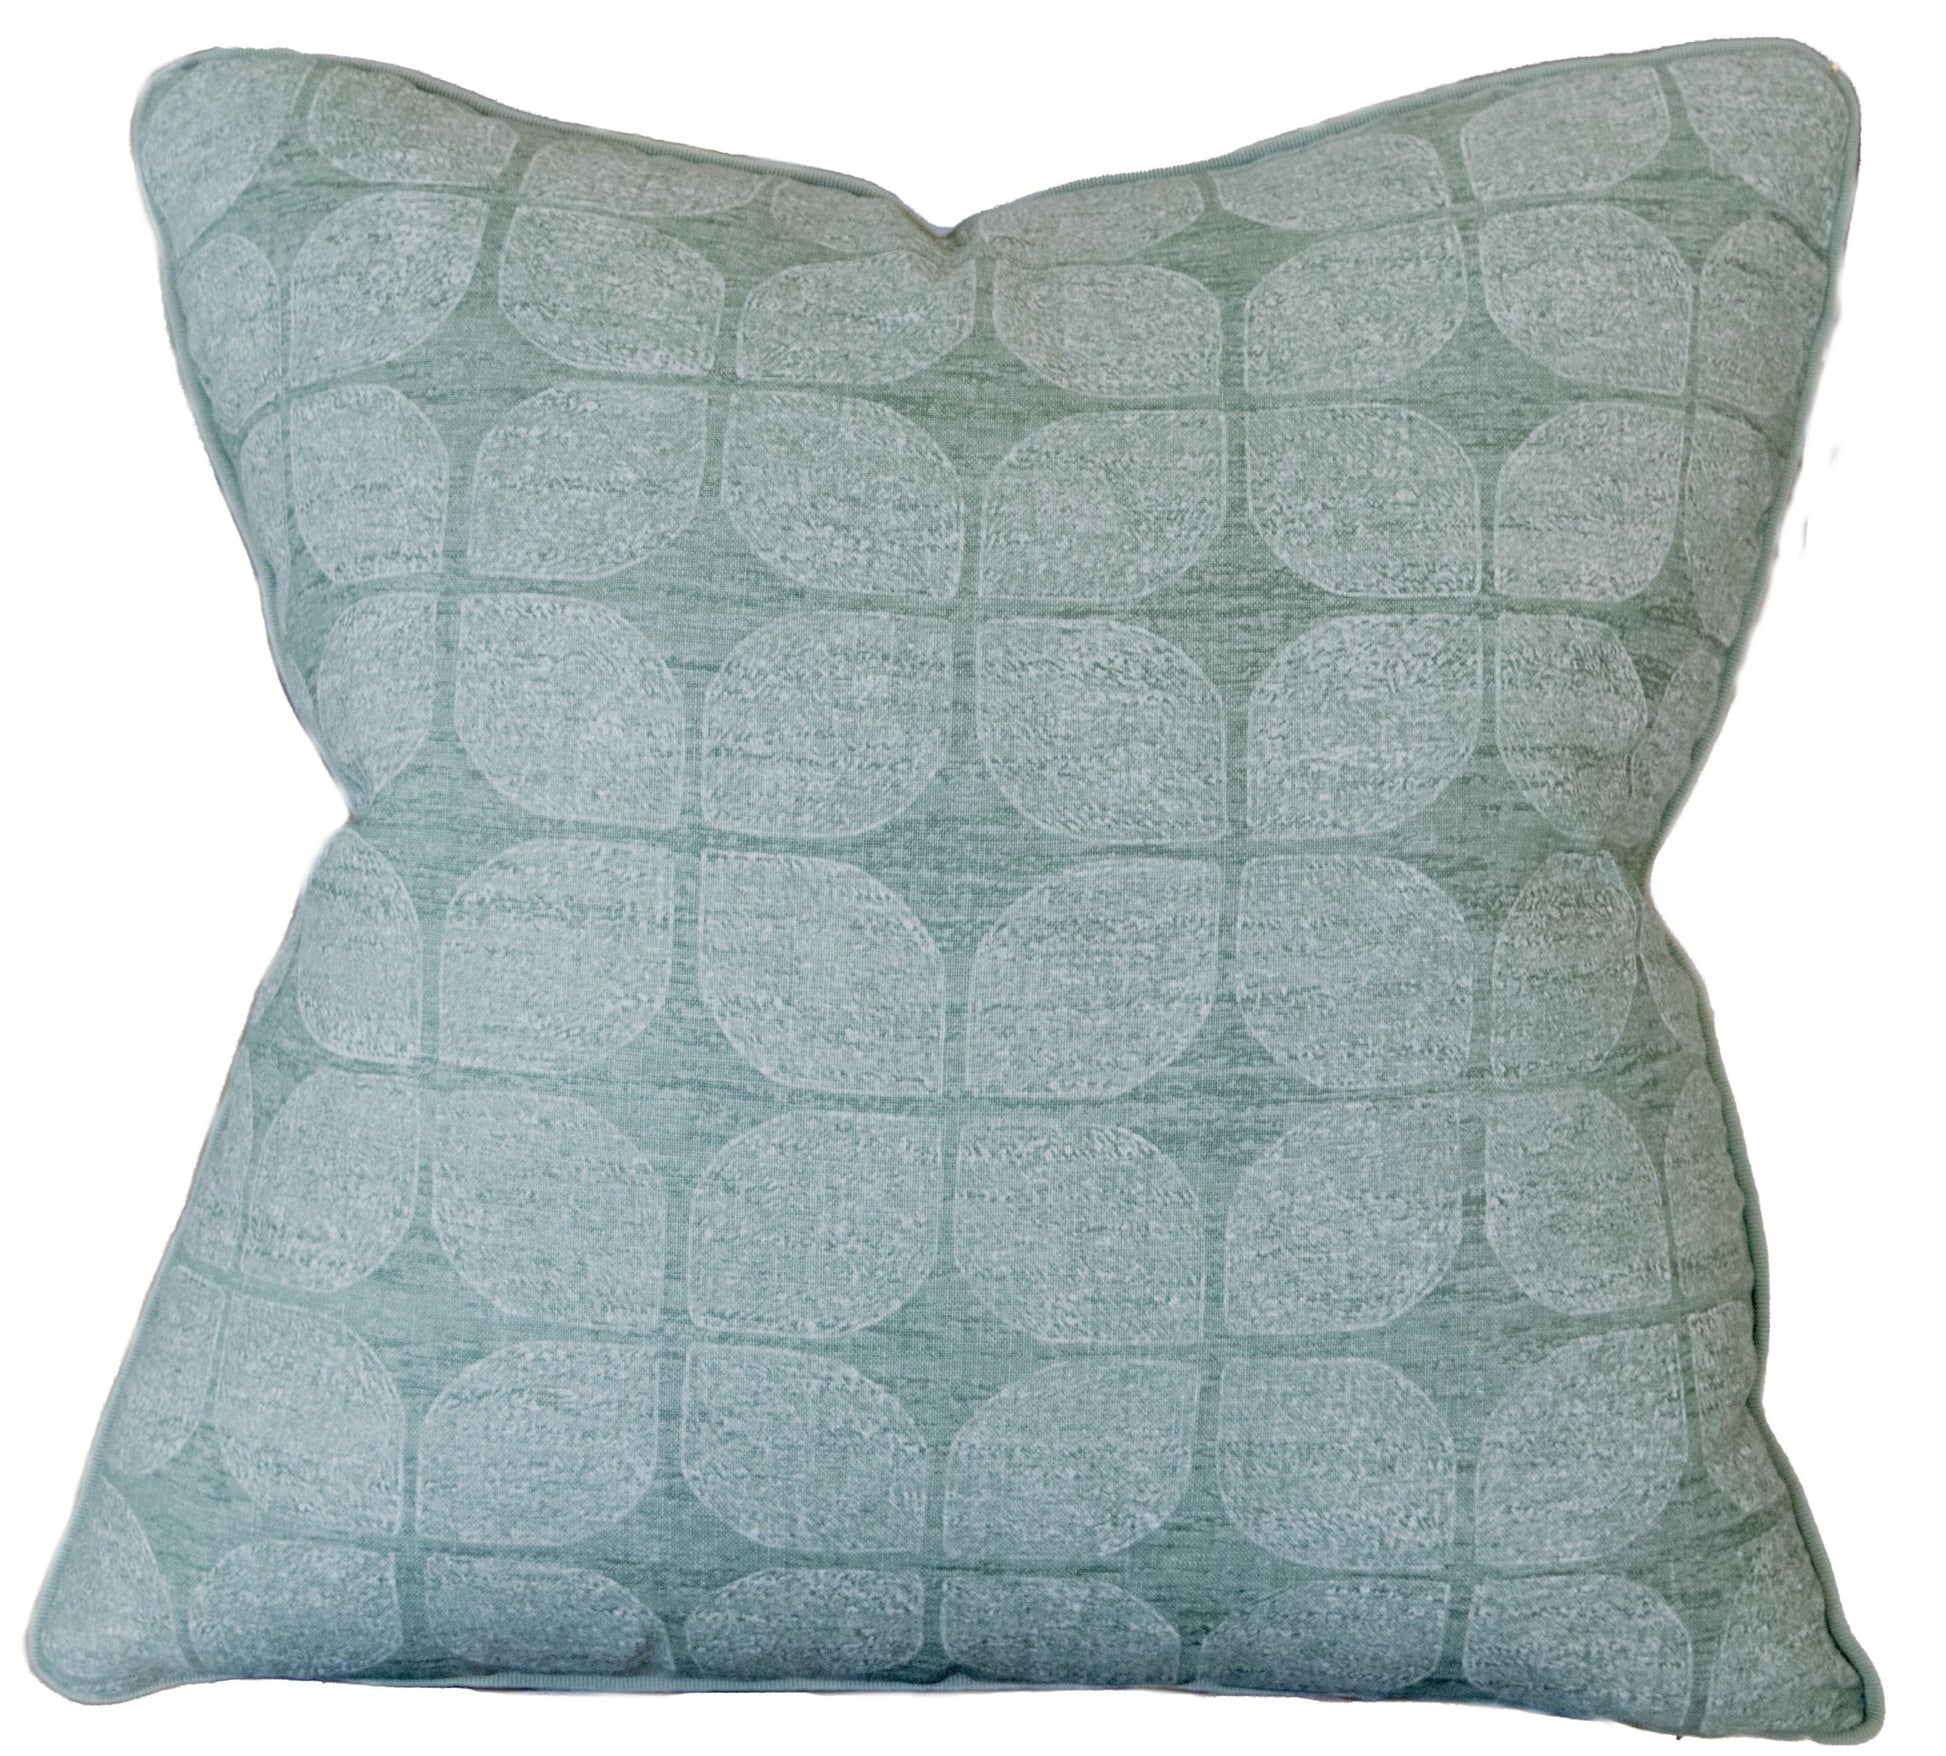 A Petaluma Moss Pillow, light green with a geometric leaf pattern, crafted using the finest materials and special attention to detail.